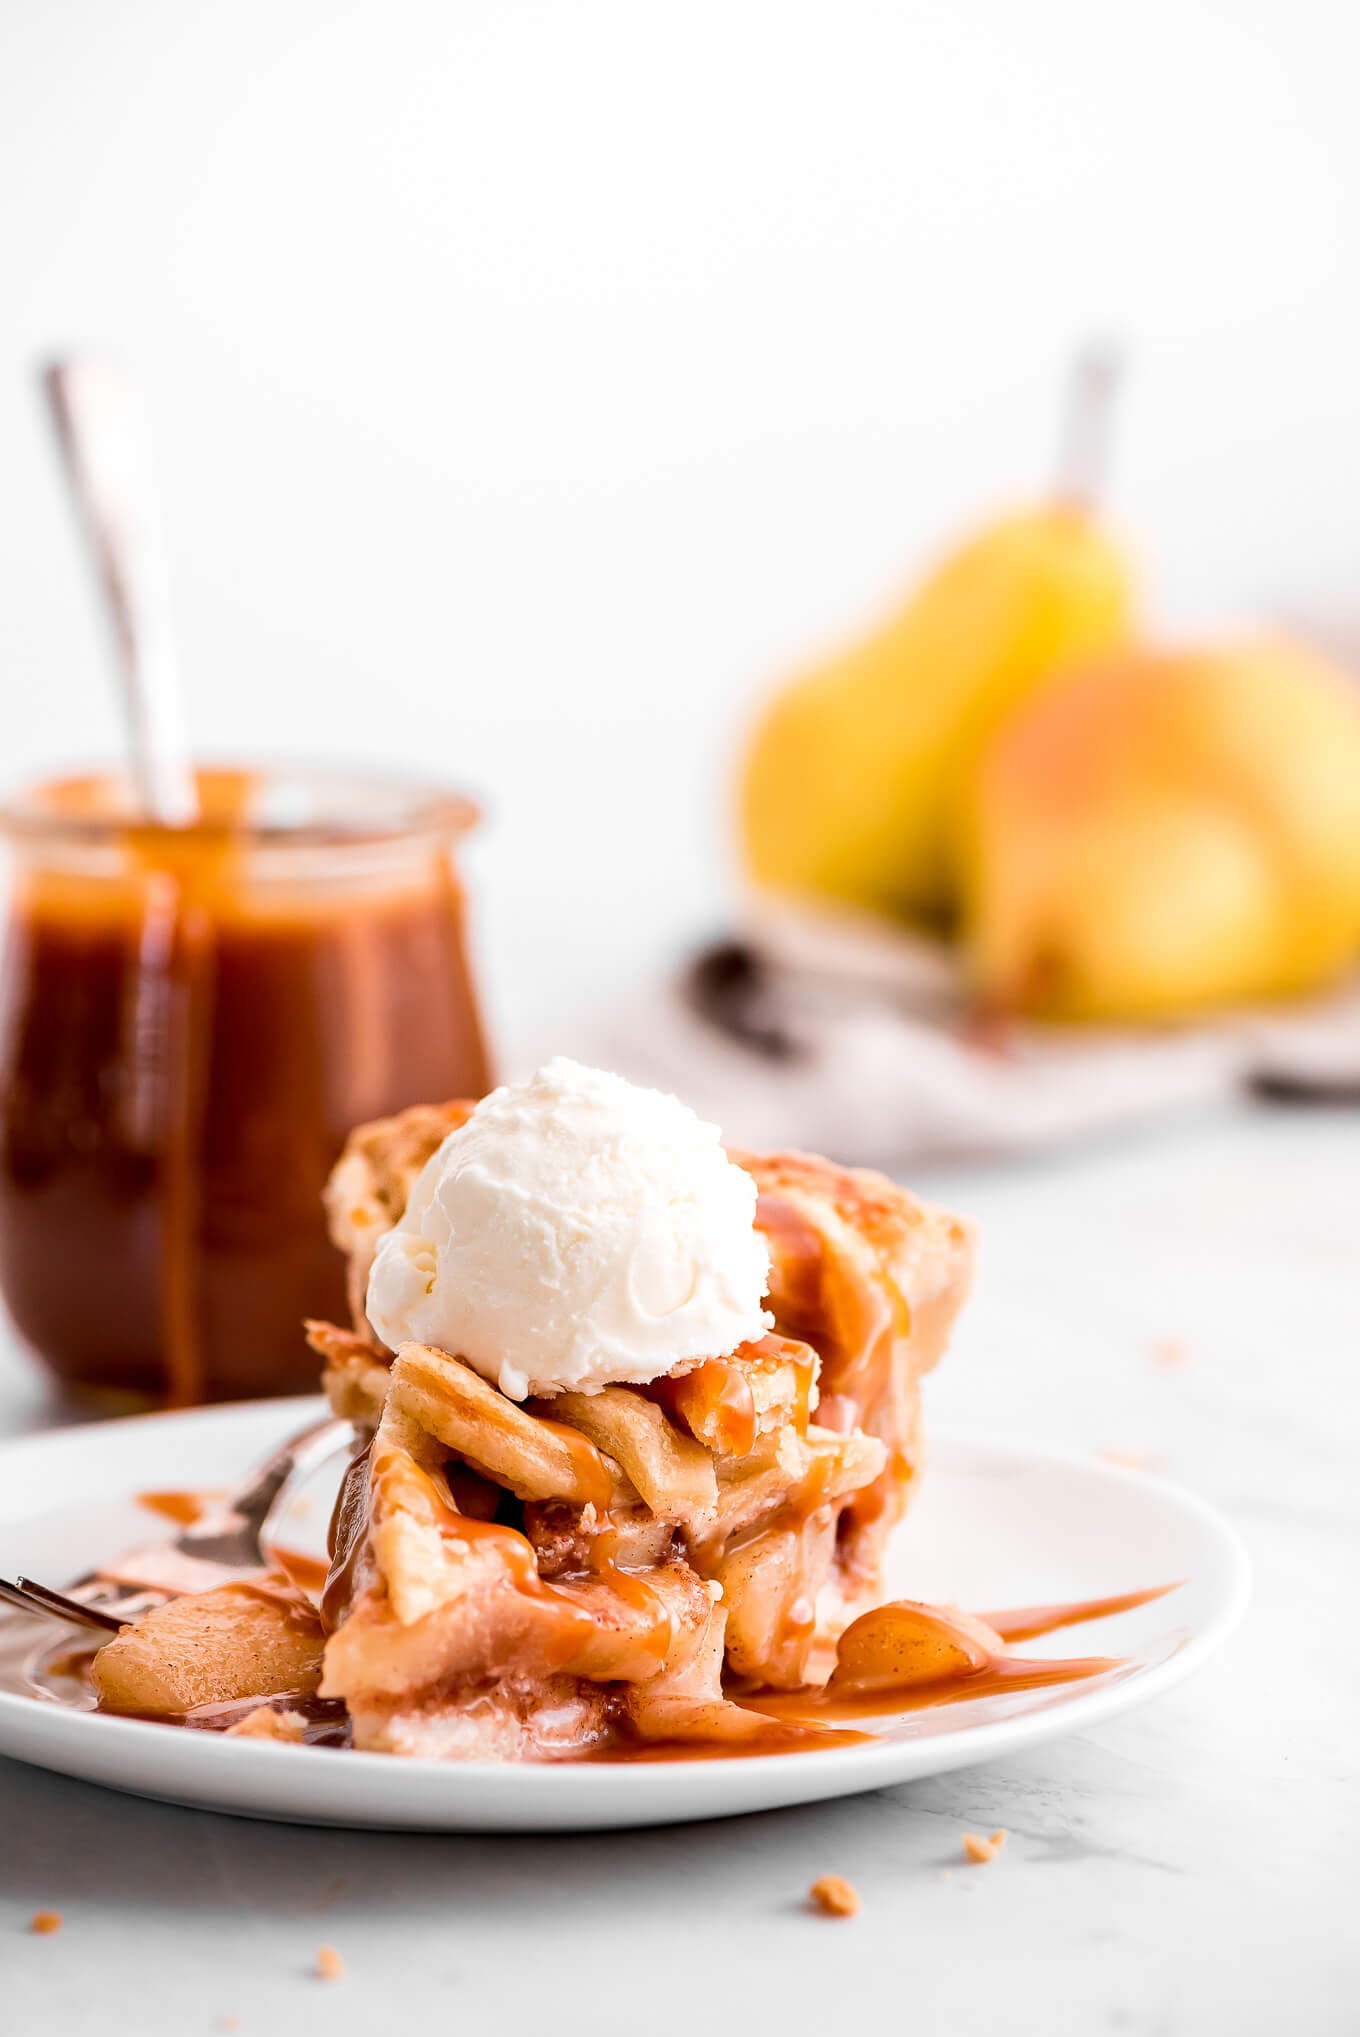 A slice of Pear Pie with caramel sauce and vanilla ice cream on top.